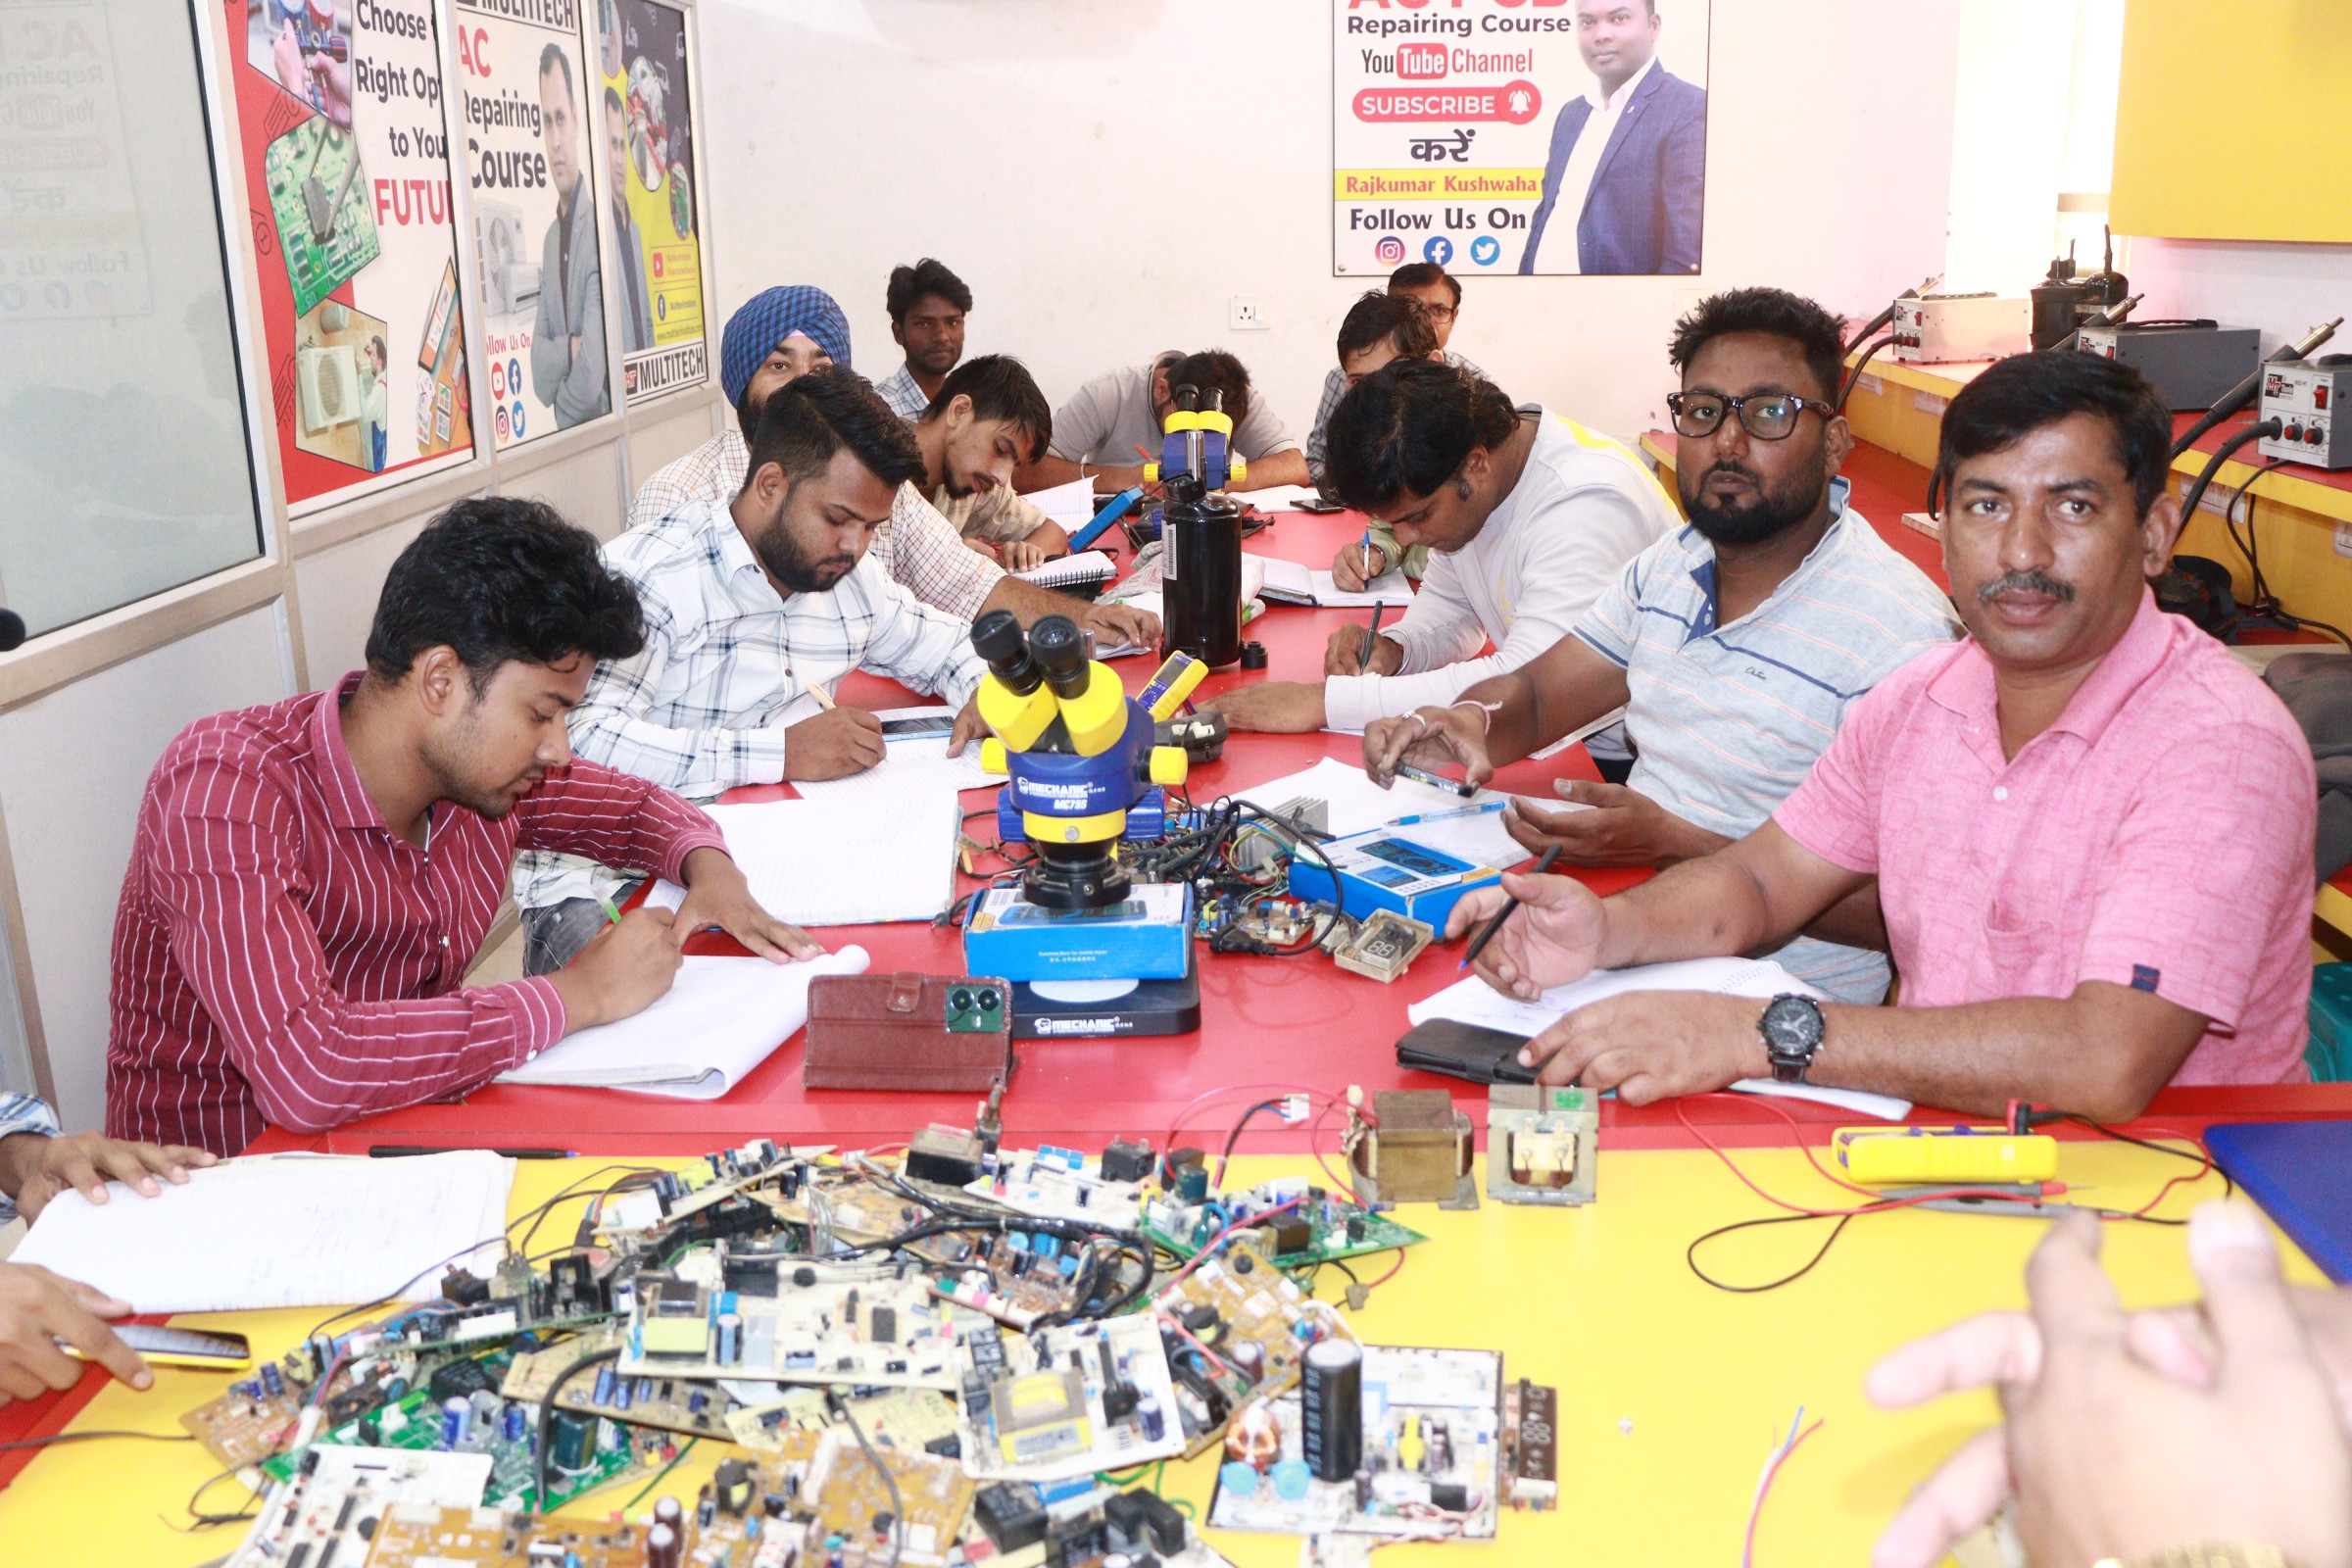 AC Repairing Course in the Heart of Delhi